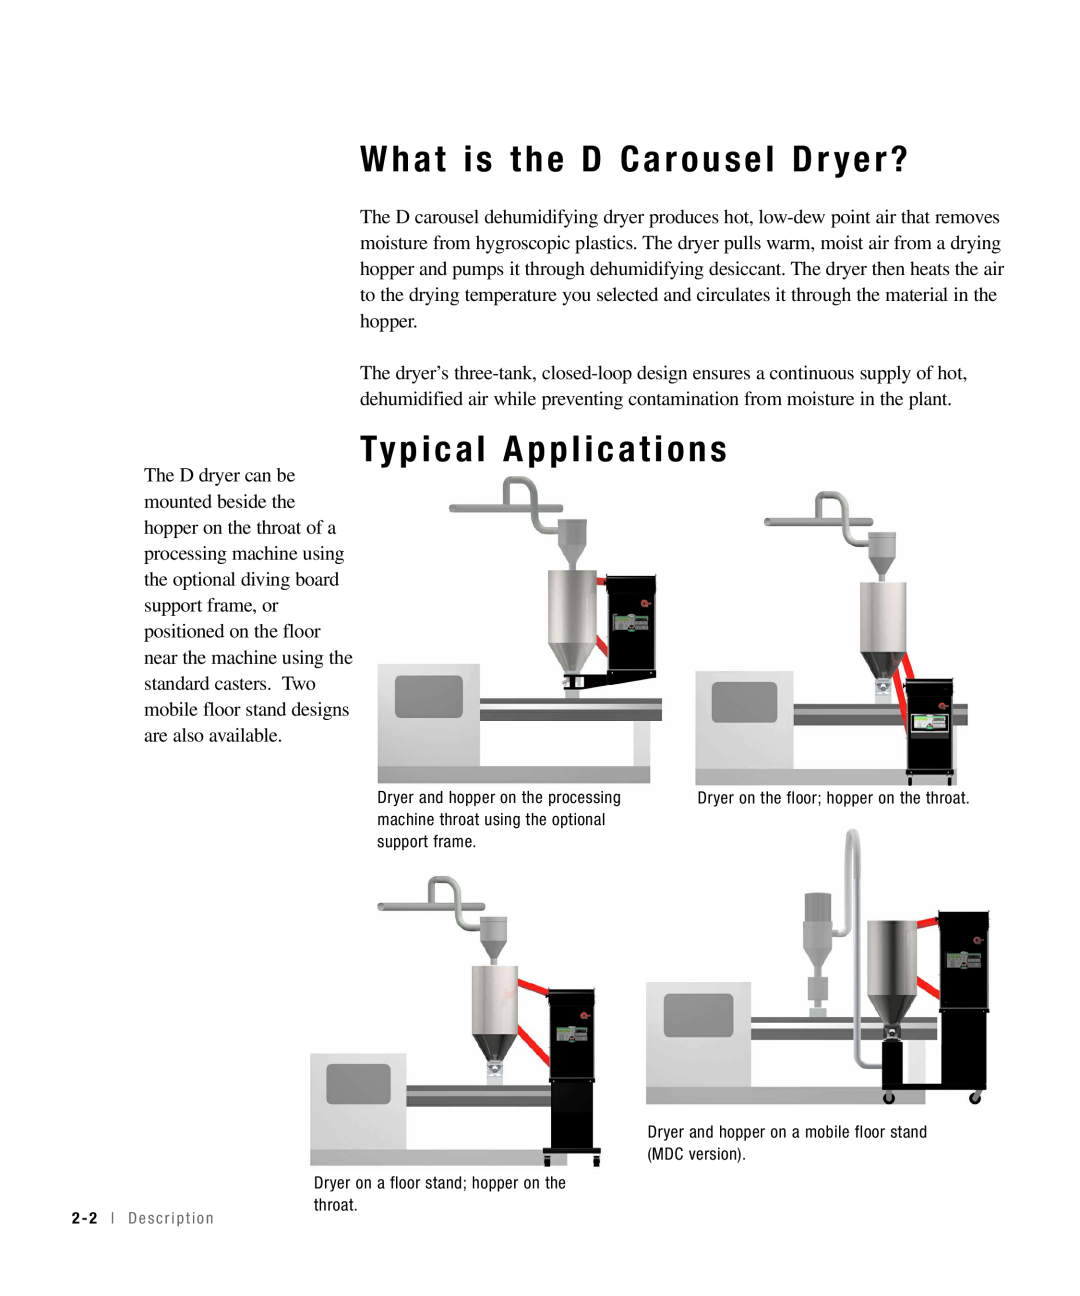 Conair 25, 15, 50 What is the D Carousel Dr yer?, Typical Applications, Dryer and hopper on the processing, support frame 